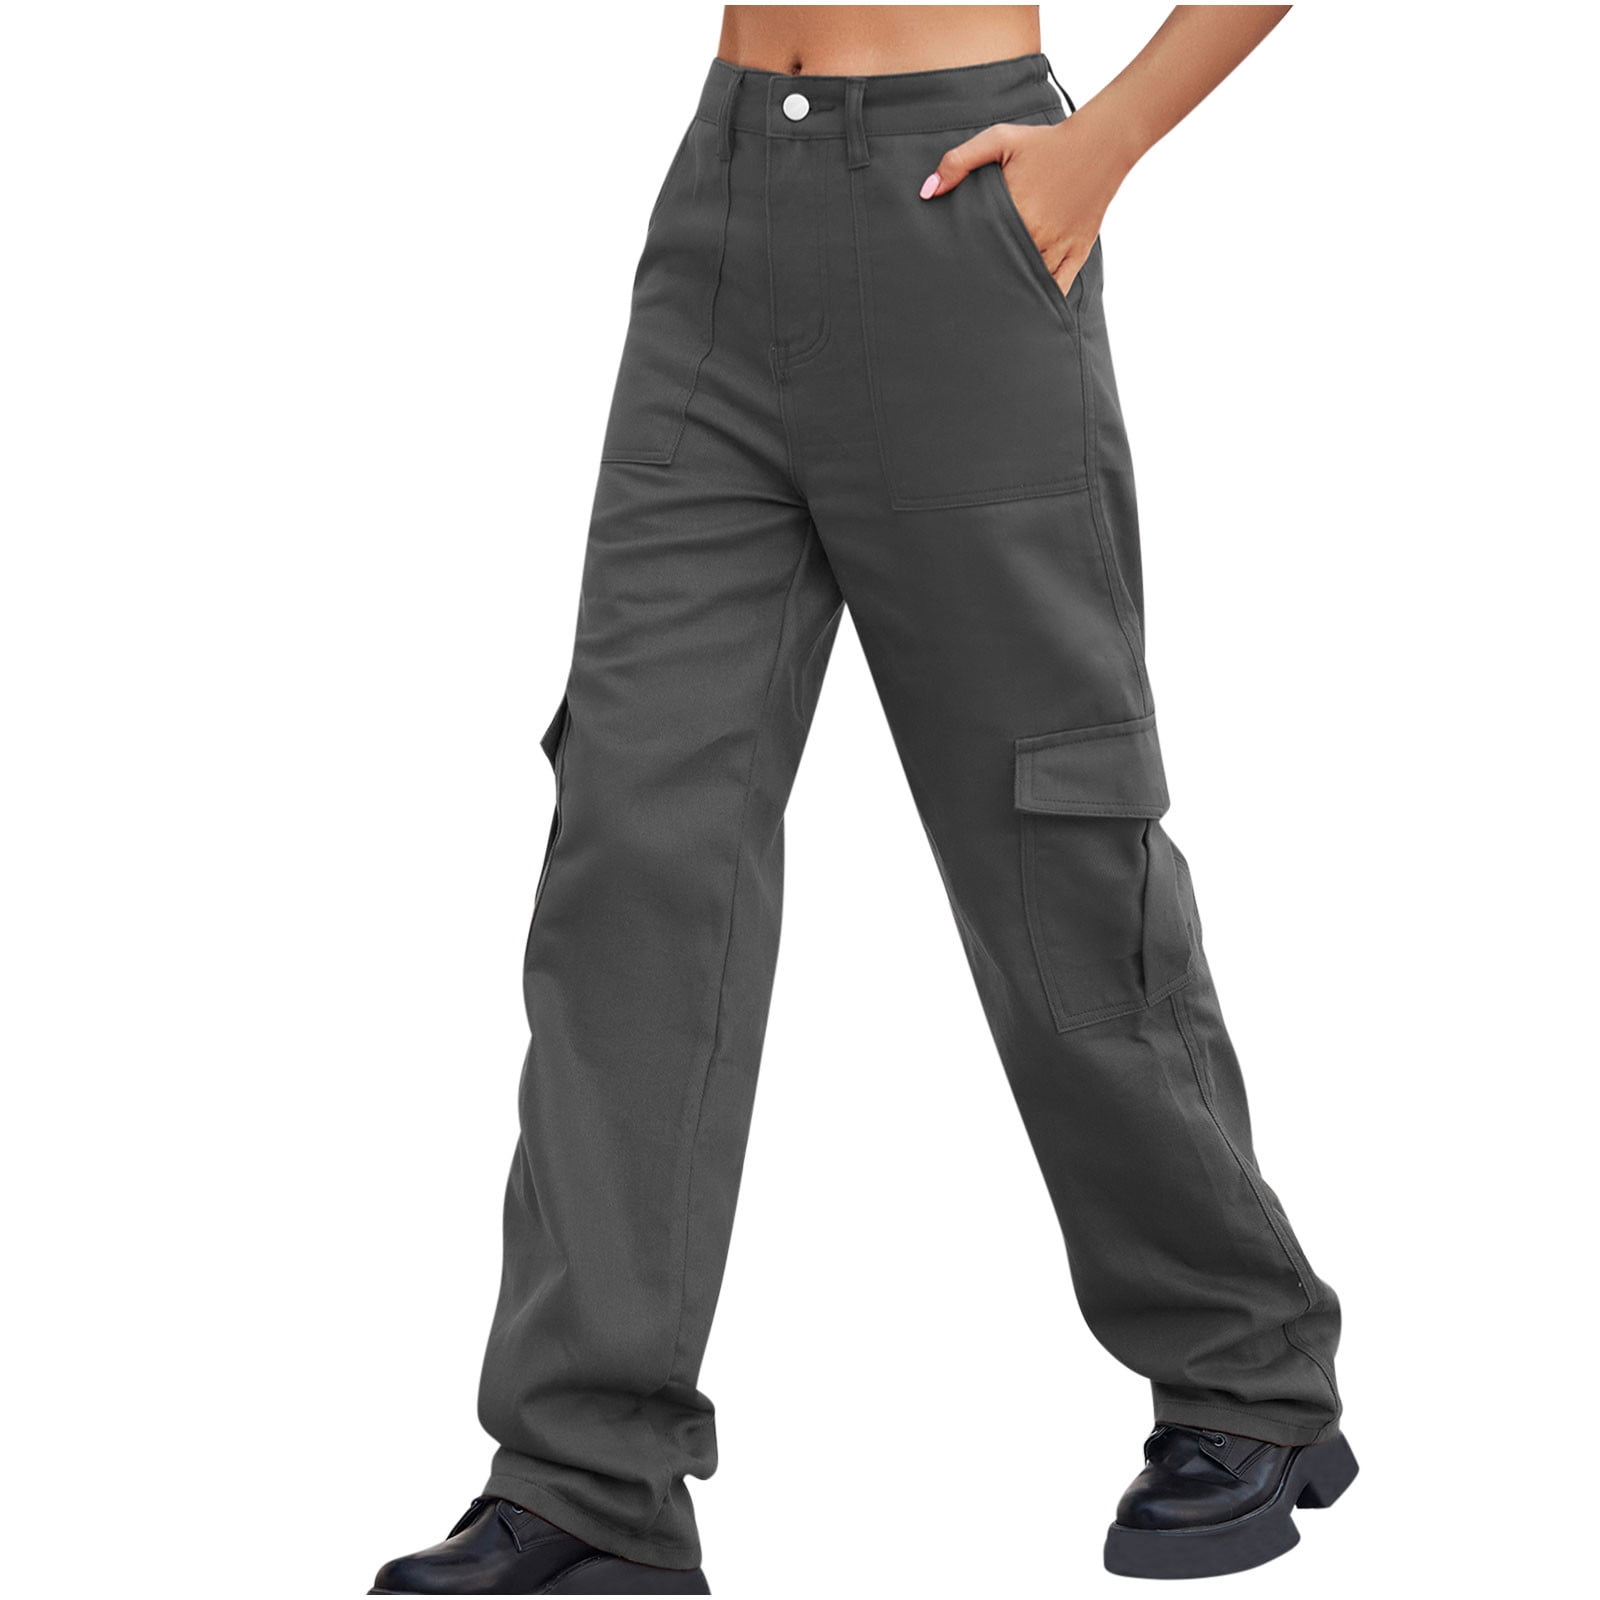  black of friday deals today Cargo Pants Women Trendy Corduroy  Cargo Pants Classic Fit Jeans Military Combat Cargo Trousers licras  deportivas de mujer cortas sales today clearance Gifts Under 5 Dollars 